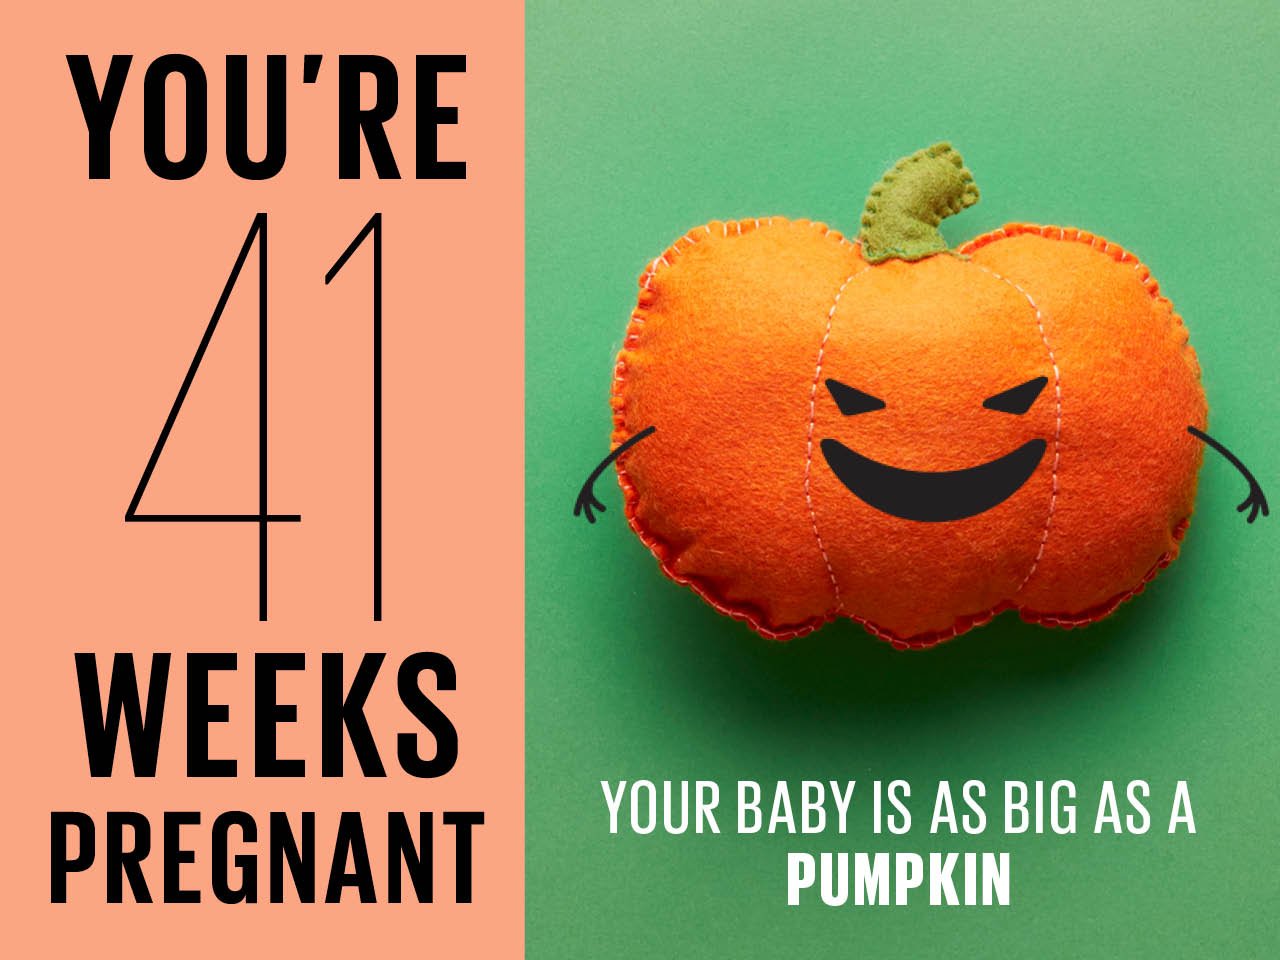 Felt pumpkin used to show how big baby is at 41 weeks